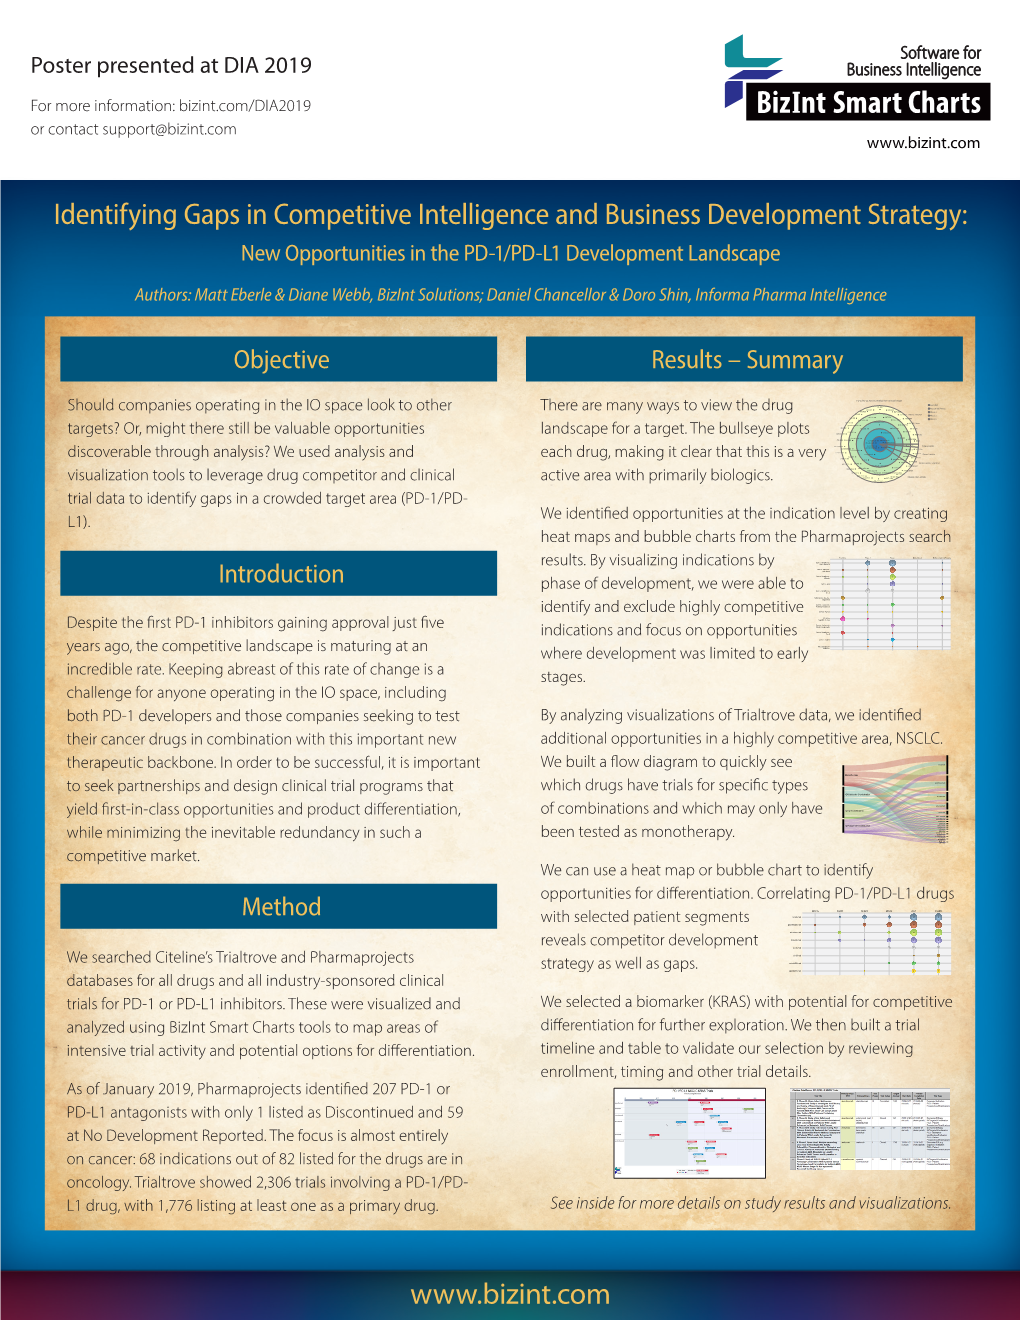 Identifying Gaps in Competitive Intelligence and Business Development Strategy: New Opportunities in the PD-1/PD-L1 Development Landscape